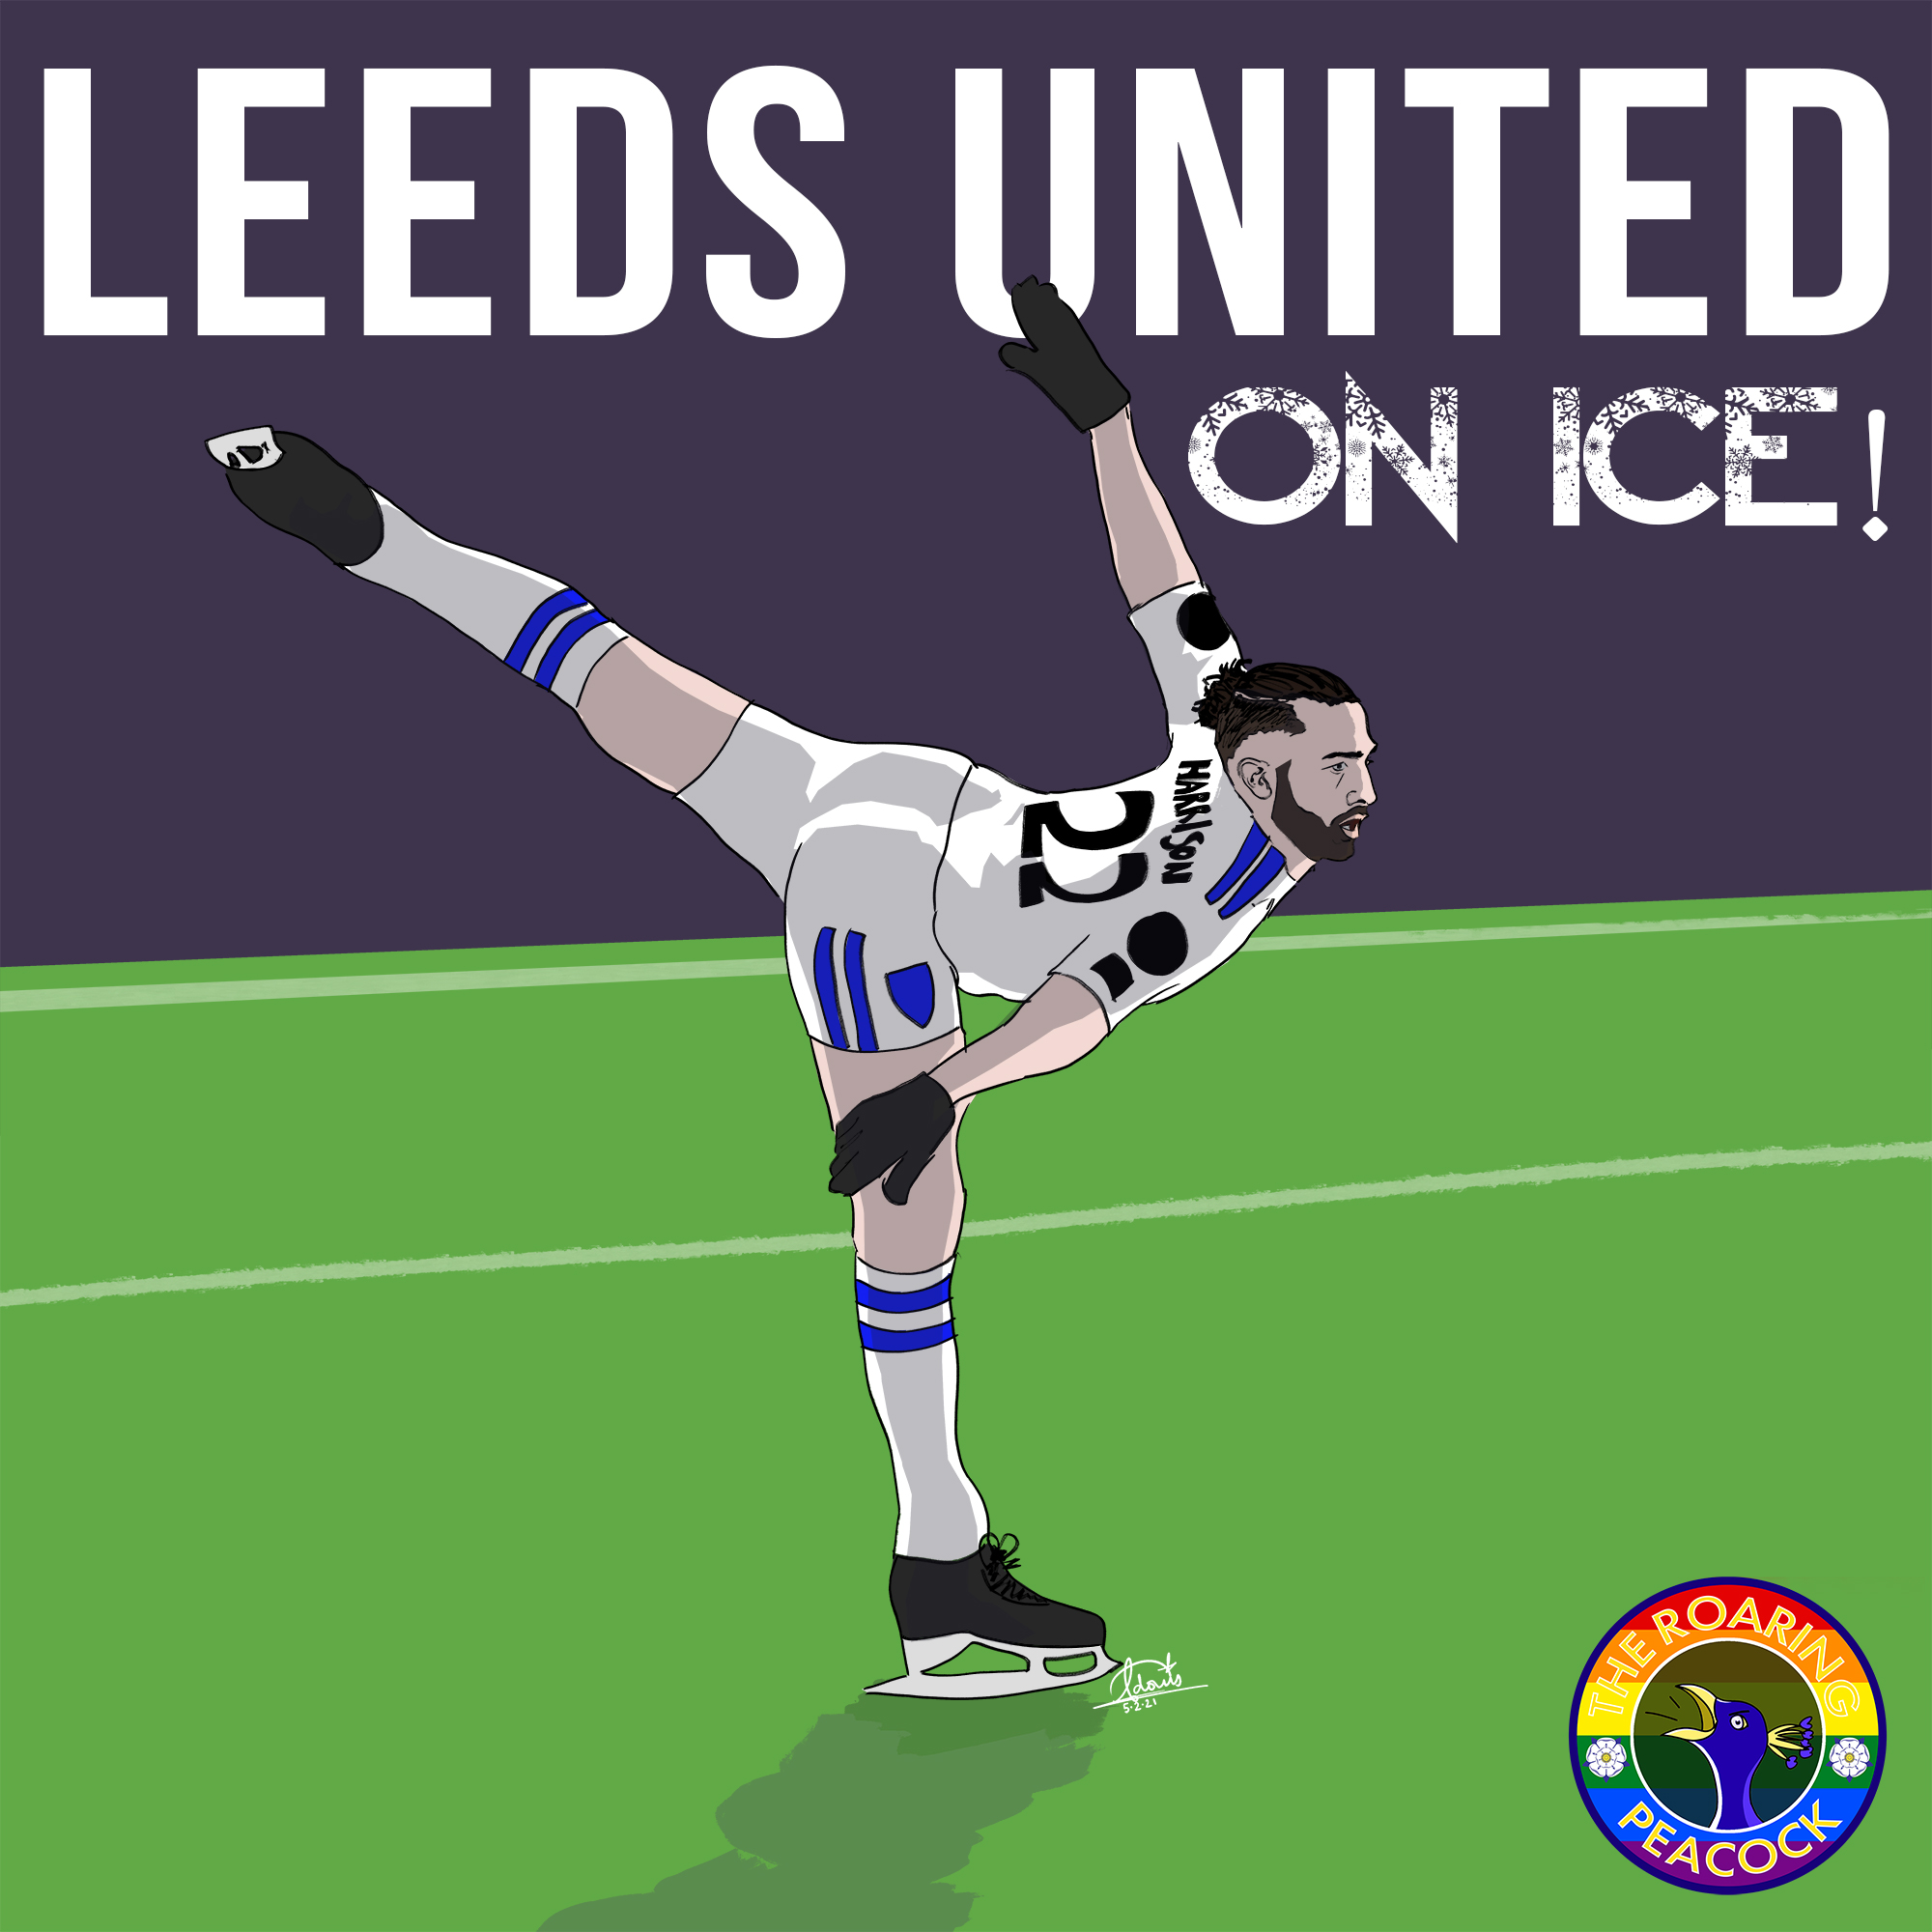 Leeds United: On Ice! | Main Cast #21 | Feat. Mish from Matching Out Together for LGBT History Month